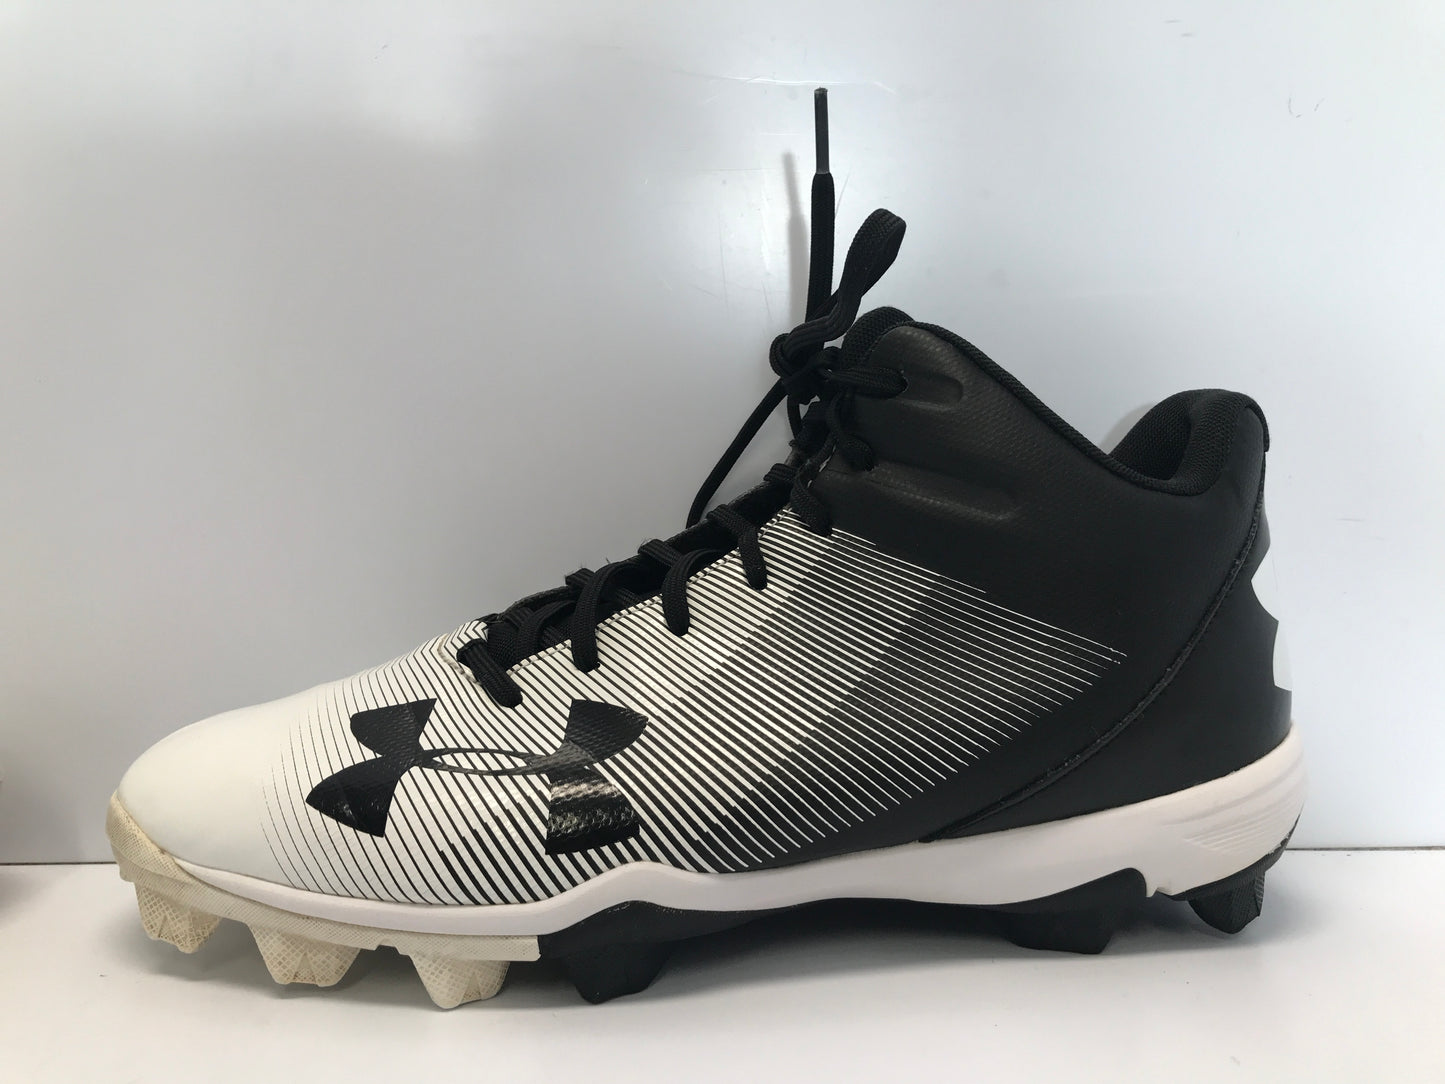 Baseball Shoes Cleats Men's Size 10 Under Armour High Tops Black White Like New